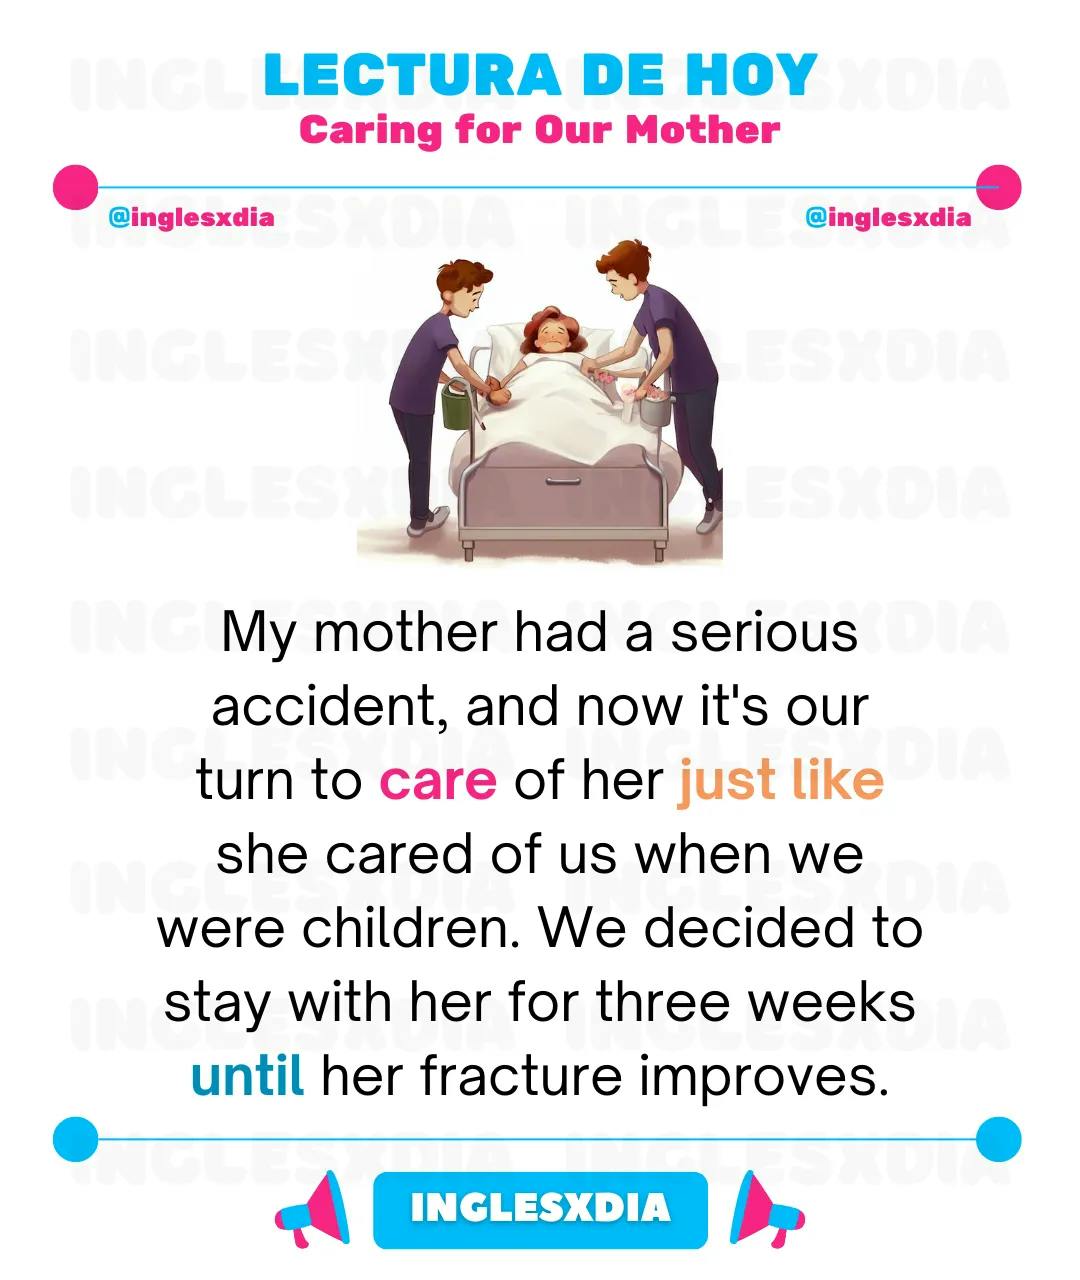 Caring for Our Mother